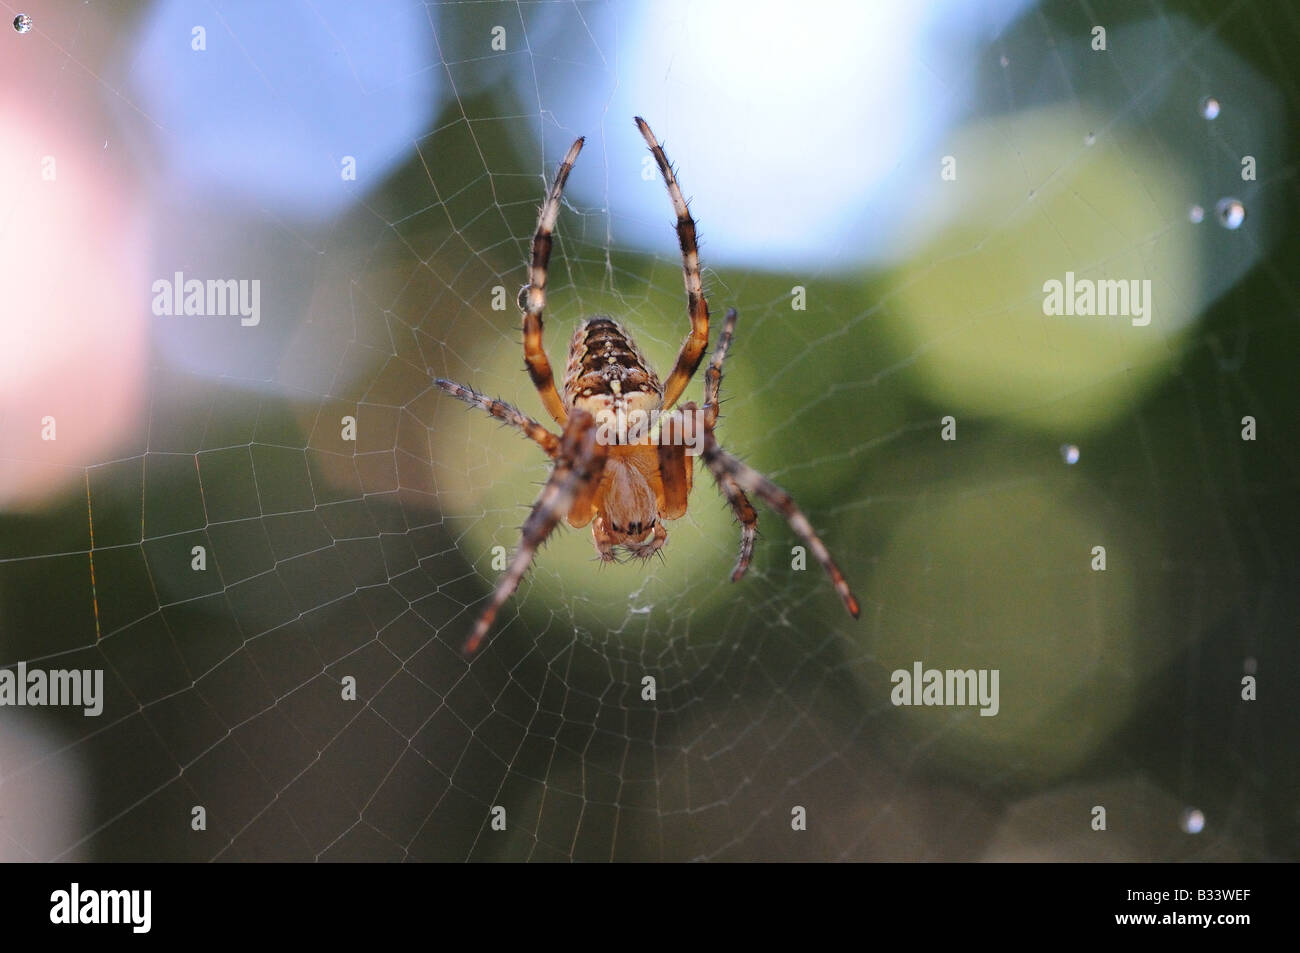 A spider, arachnid, hanging from its perfectly spun cob web which glistens in the sunlight, drops of water sparkle. Stock Photo